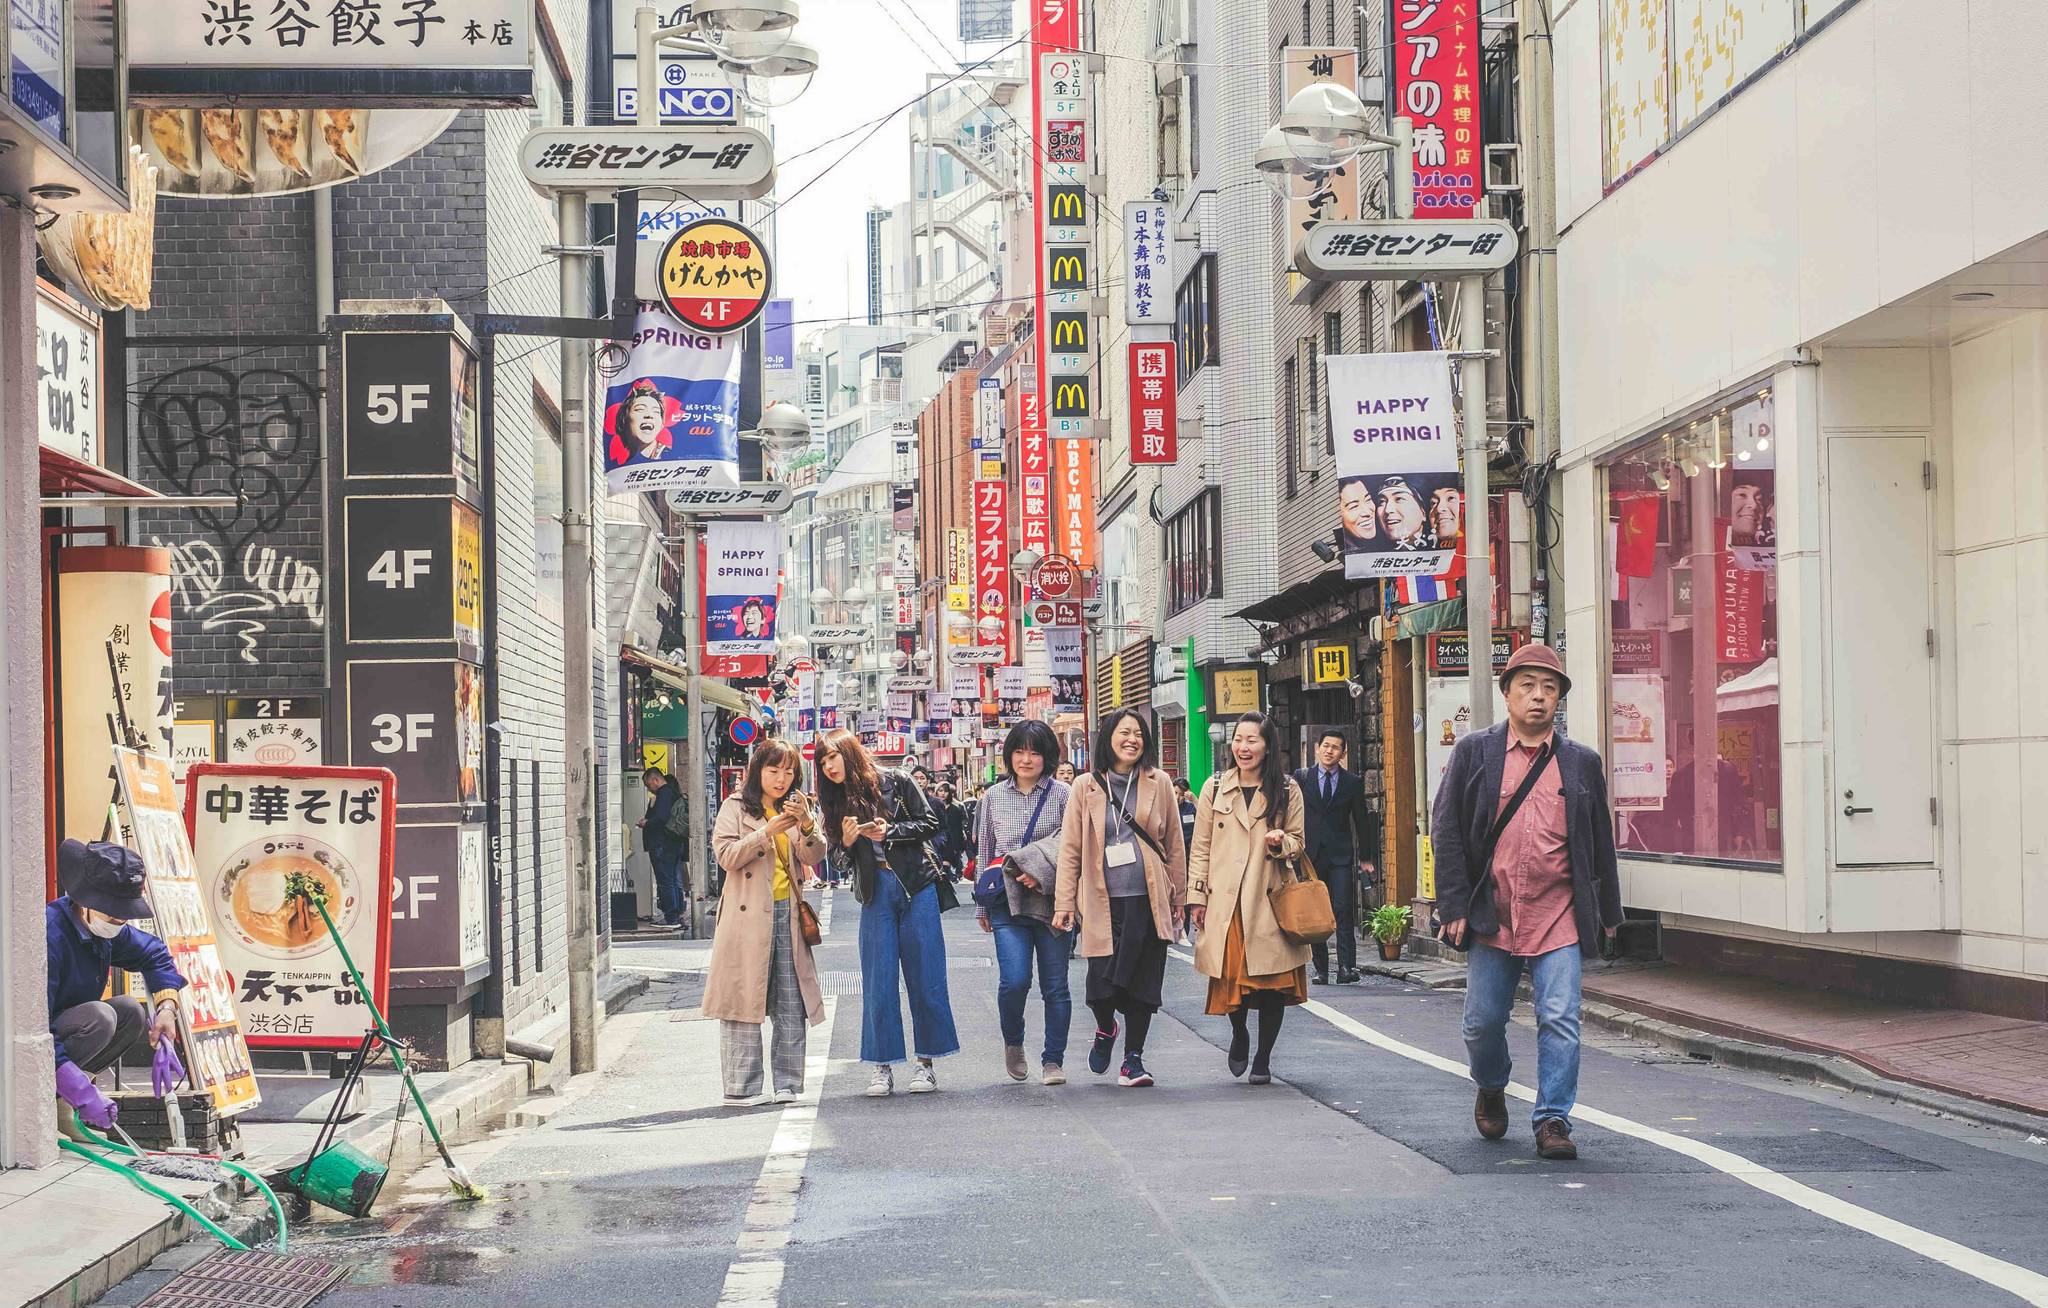 Media consumption affects tourist itineraries in Japan